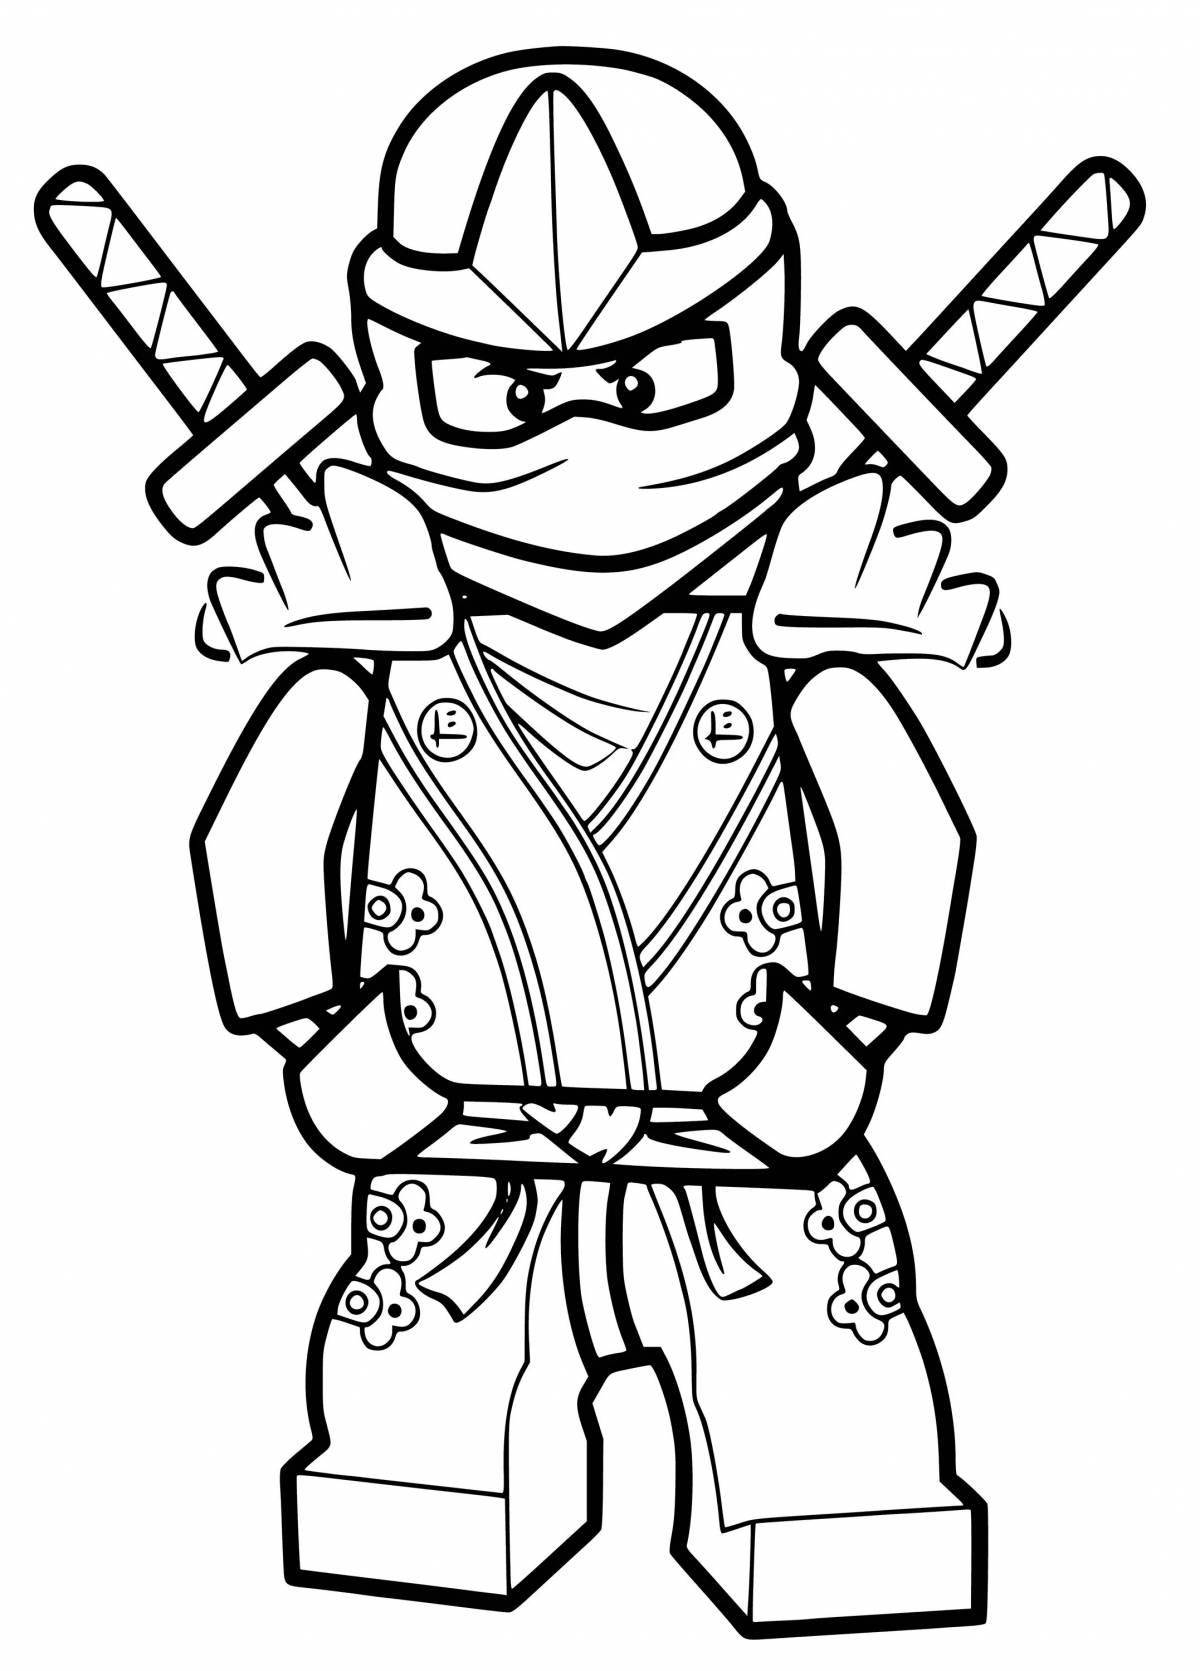 Color filled lego ninjago coloring book for kids